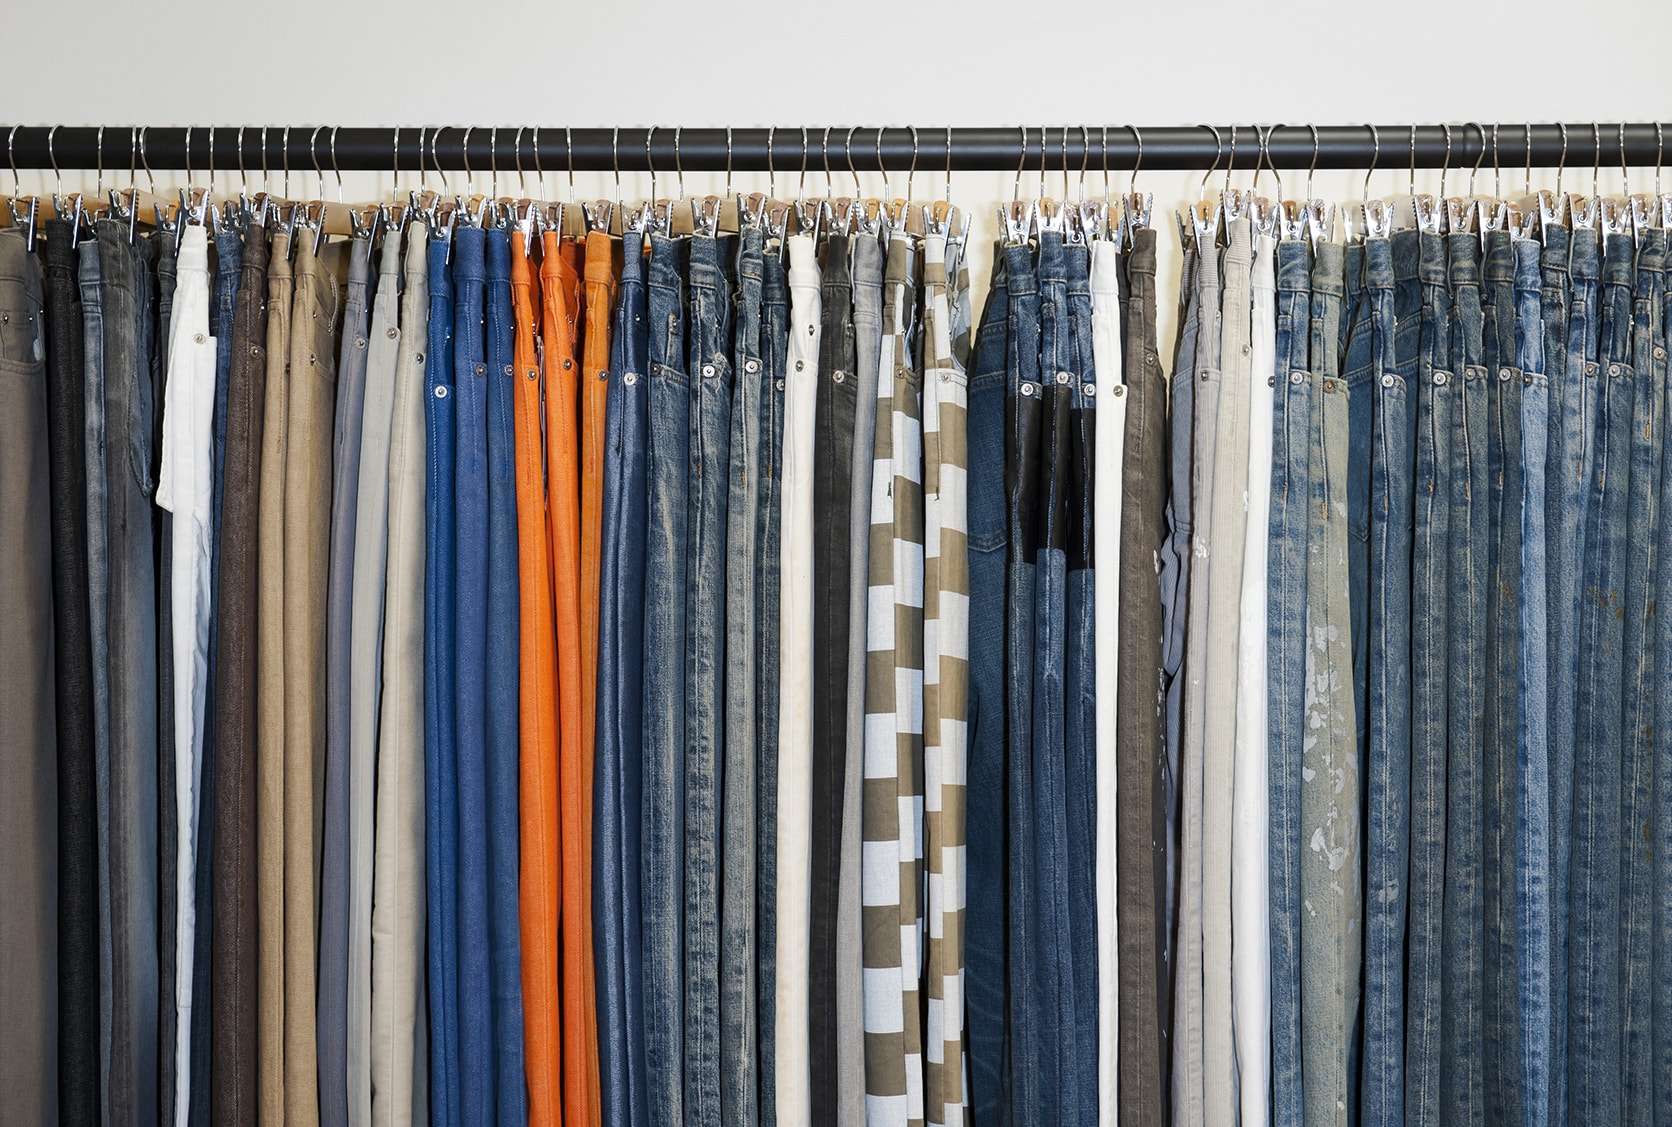 Helmut Lang denim jeans at ENDYMA's showroom. Petros Toufexis